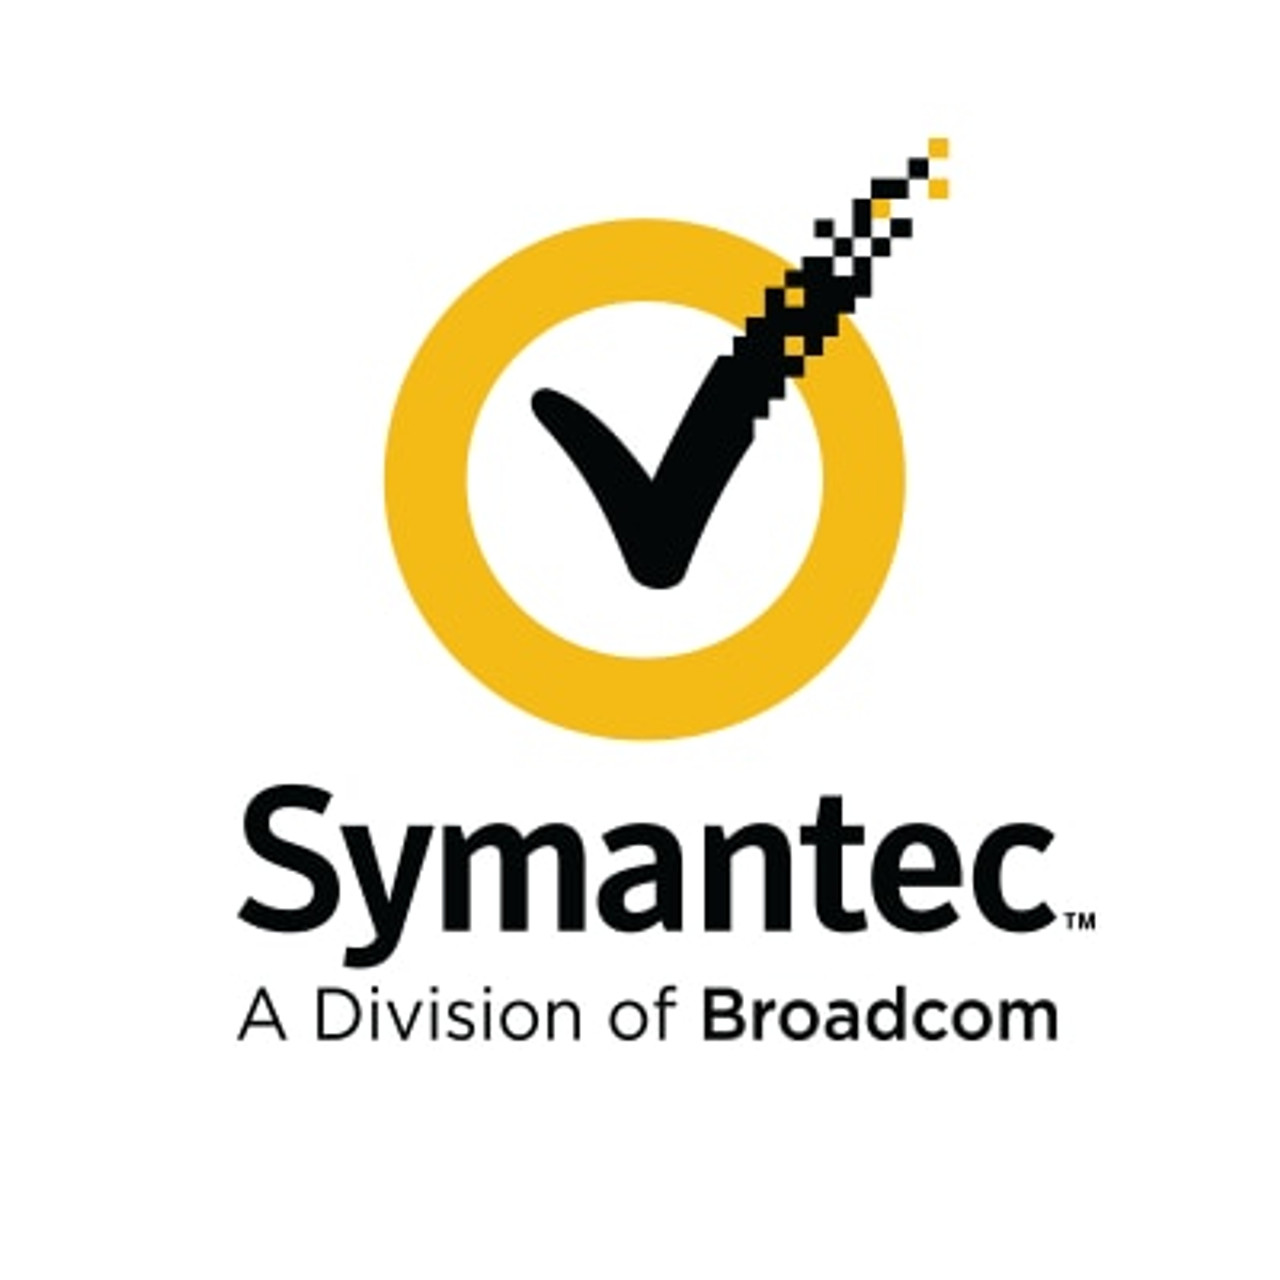 Symantec Complete Endpoint Defense (with SEP), Renewal Hybrid Subscription License with Support, 25-49 Devices 1 YR